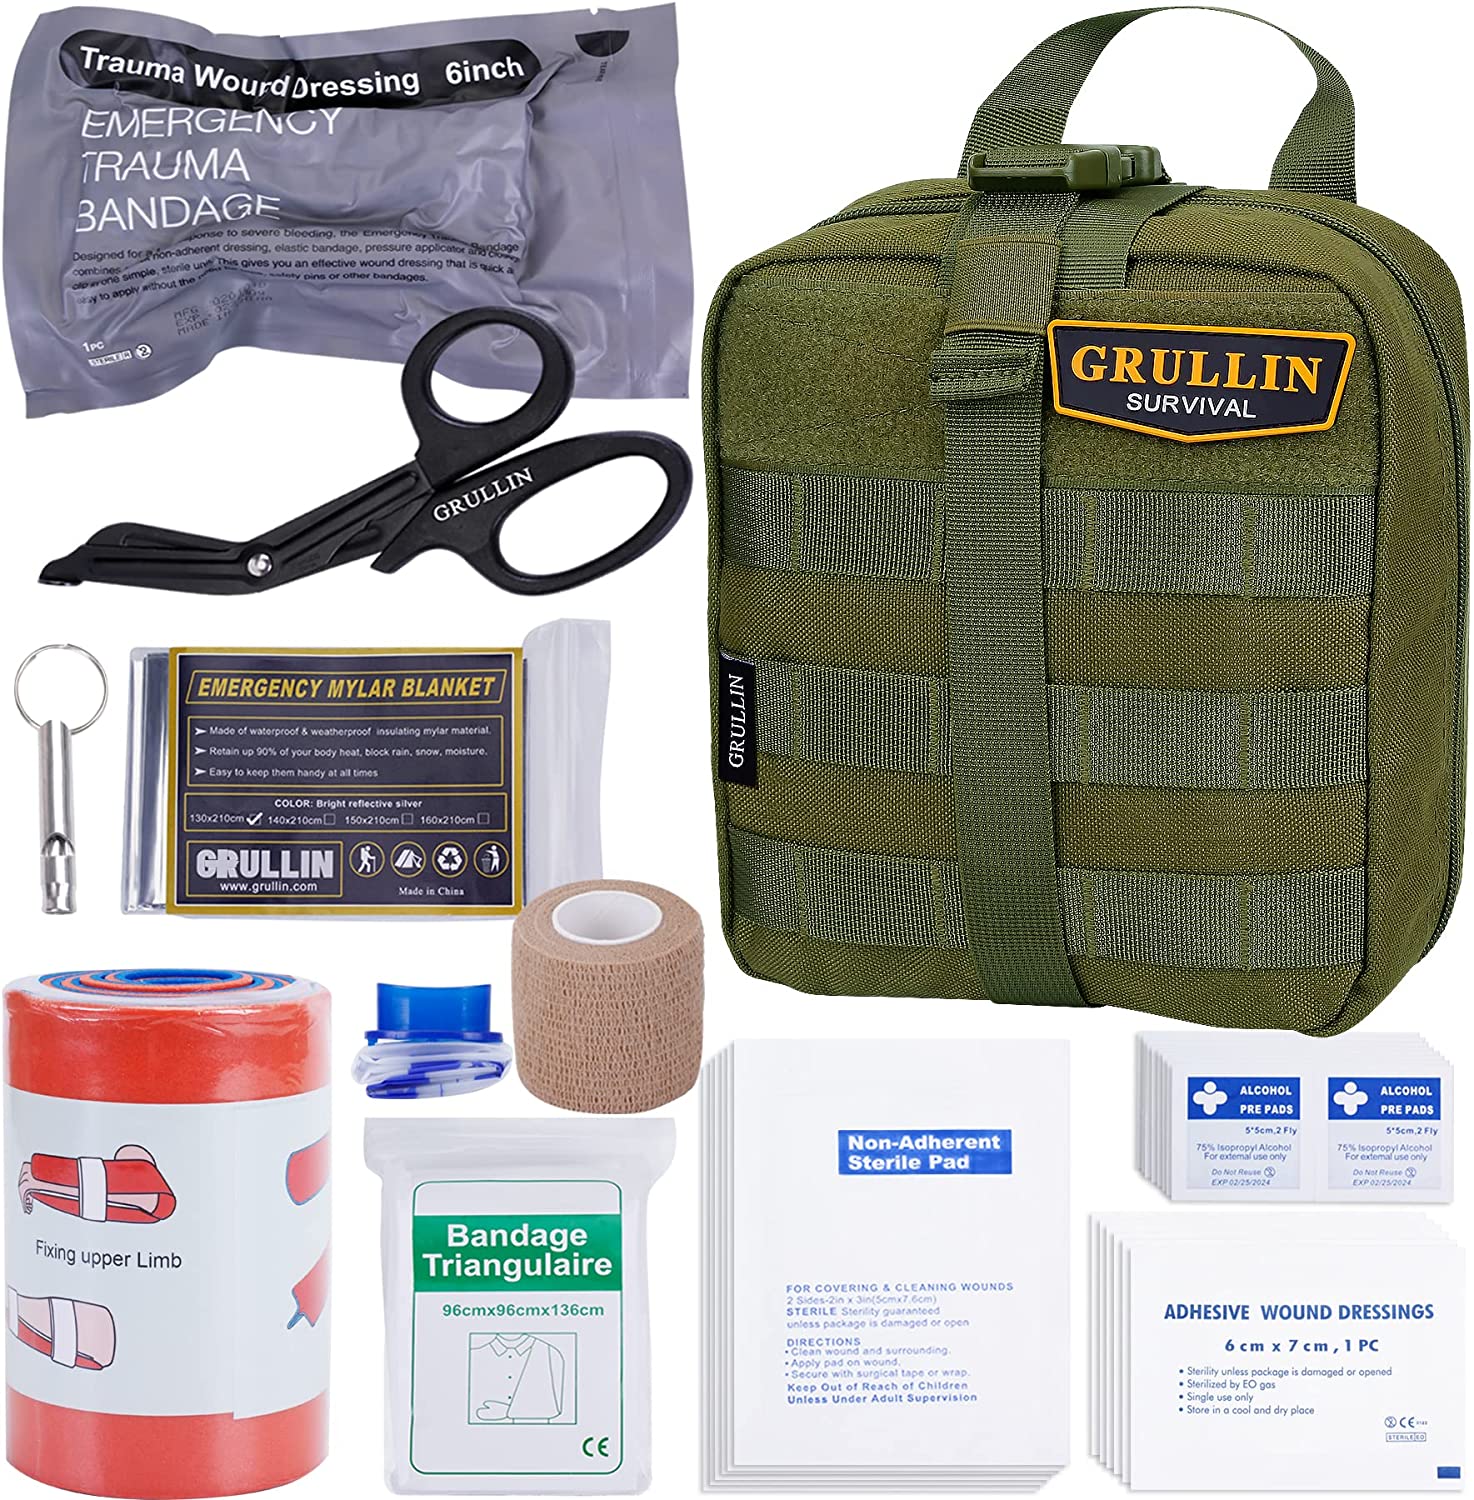 GRULLIN Survival First Aid Kit, 39 Pieces Tactical Molle EMT IFAK Pouch Emergency First Aid Survival Kits Trauma Bag Outdoor Gear for Camping Hiking Hunting Travel Car Adventures (Army Green)